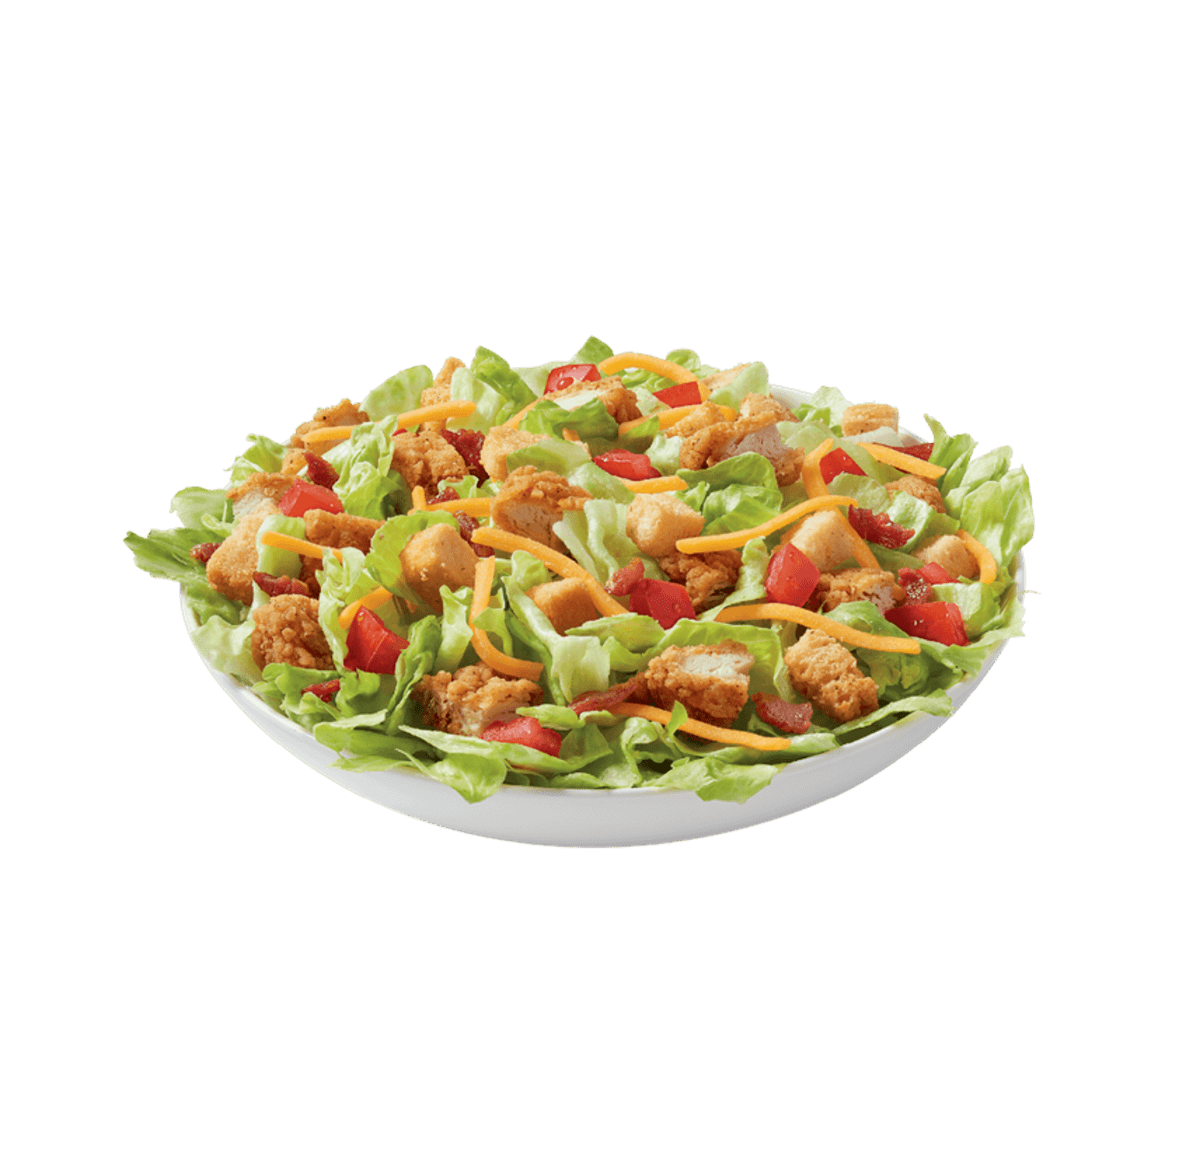 A bowl of chicken salad on a white background.